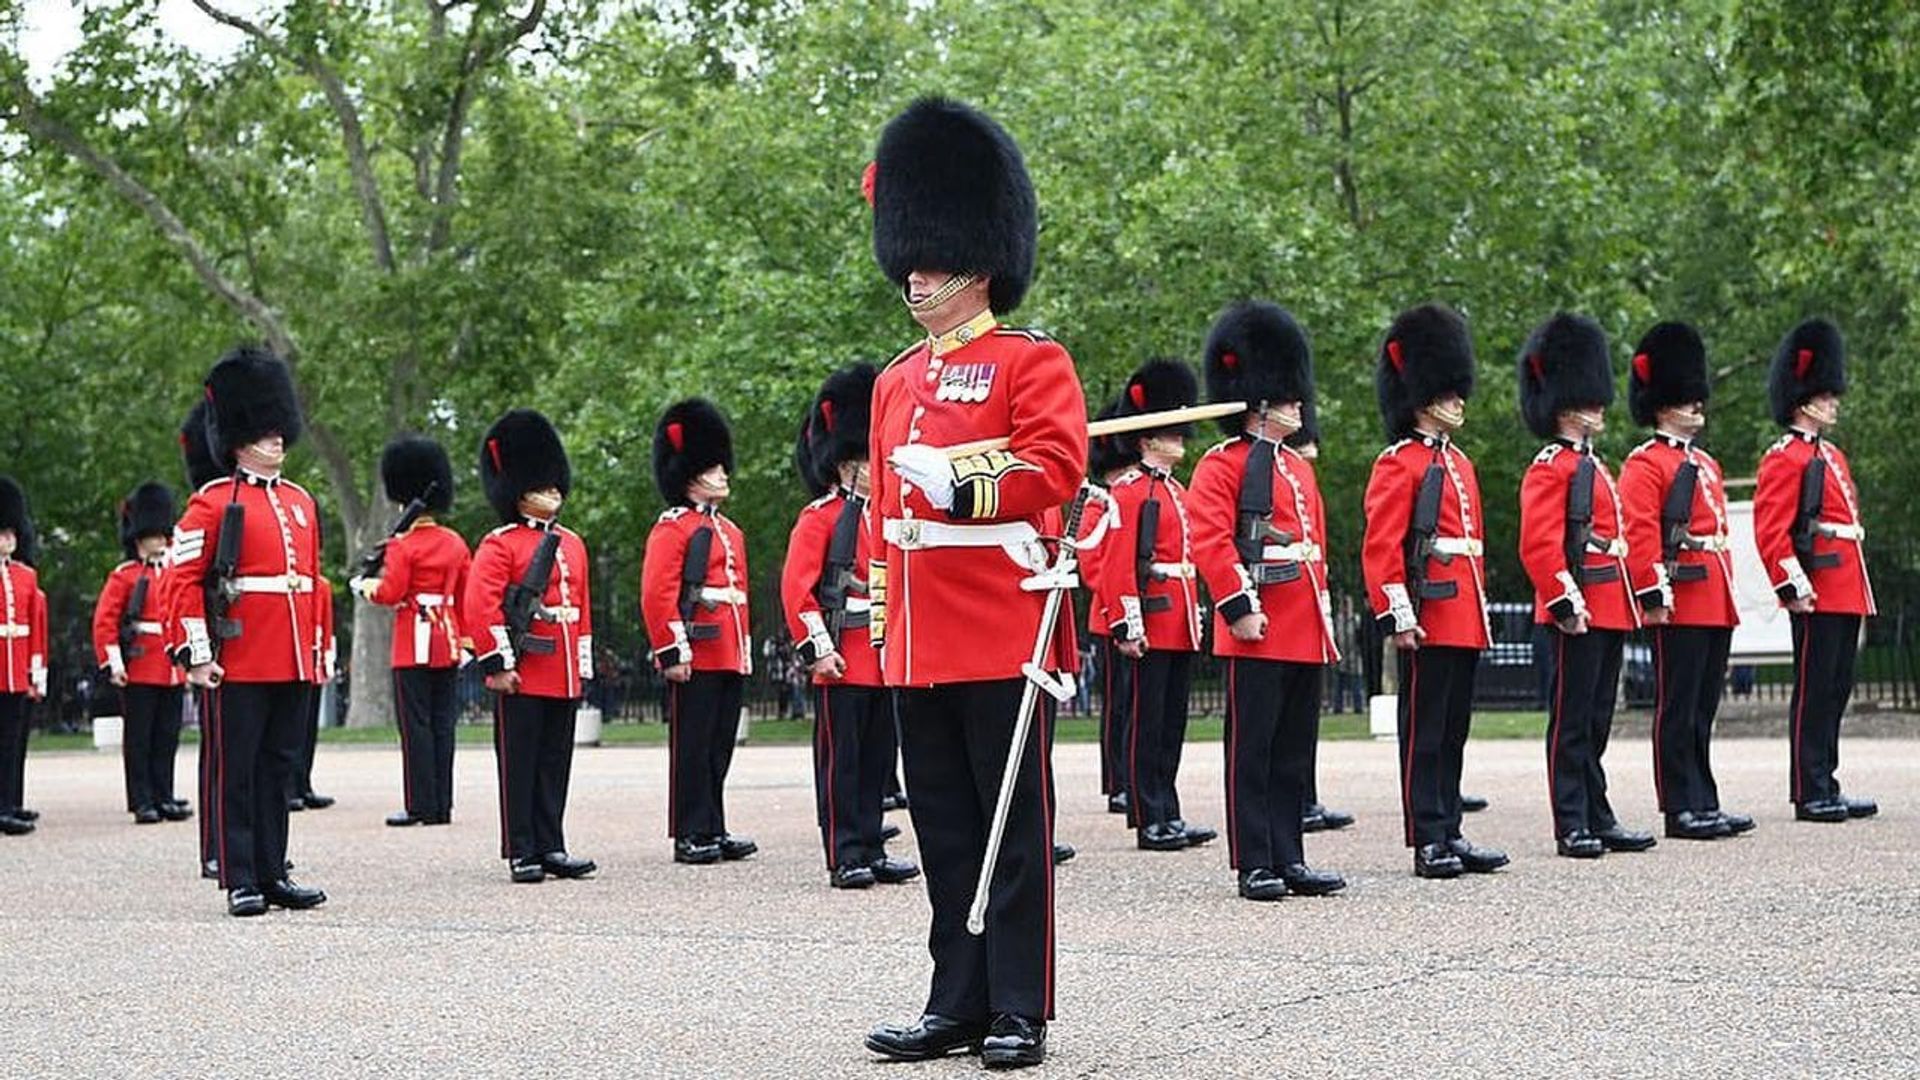 The Queen's Guards: A Year in Service background